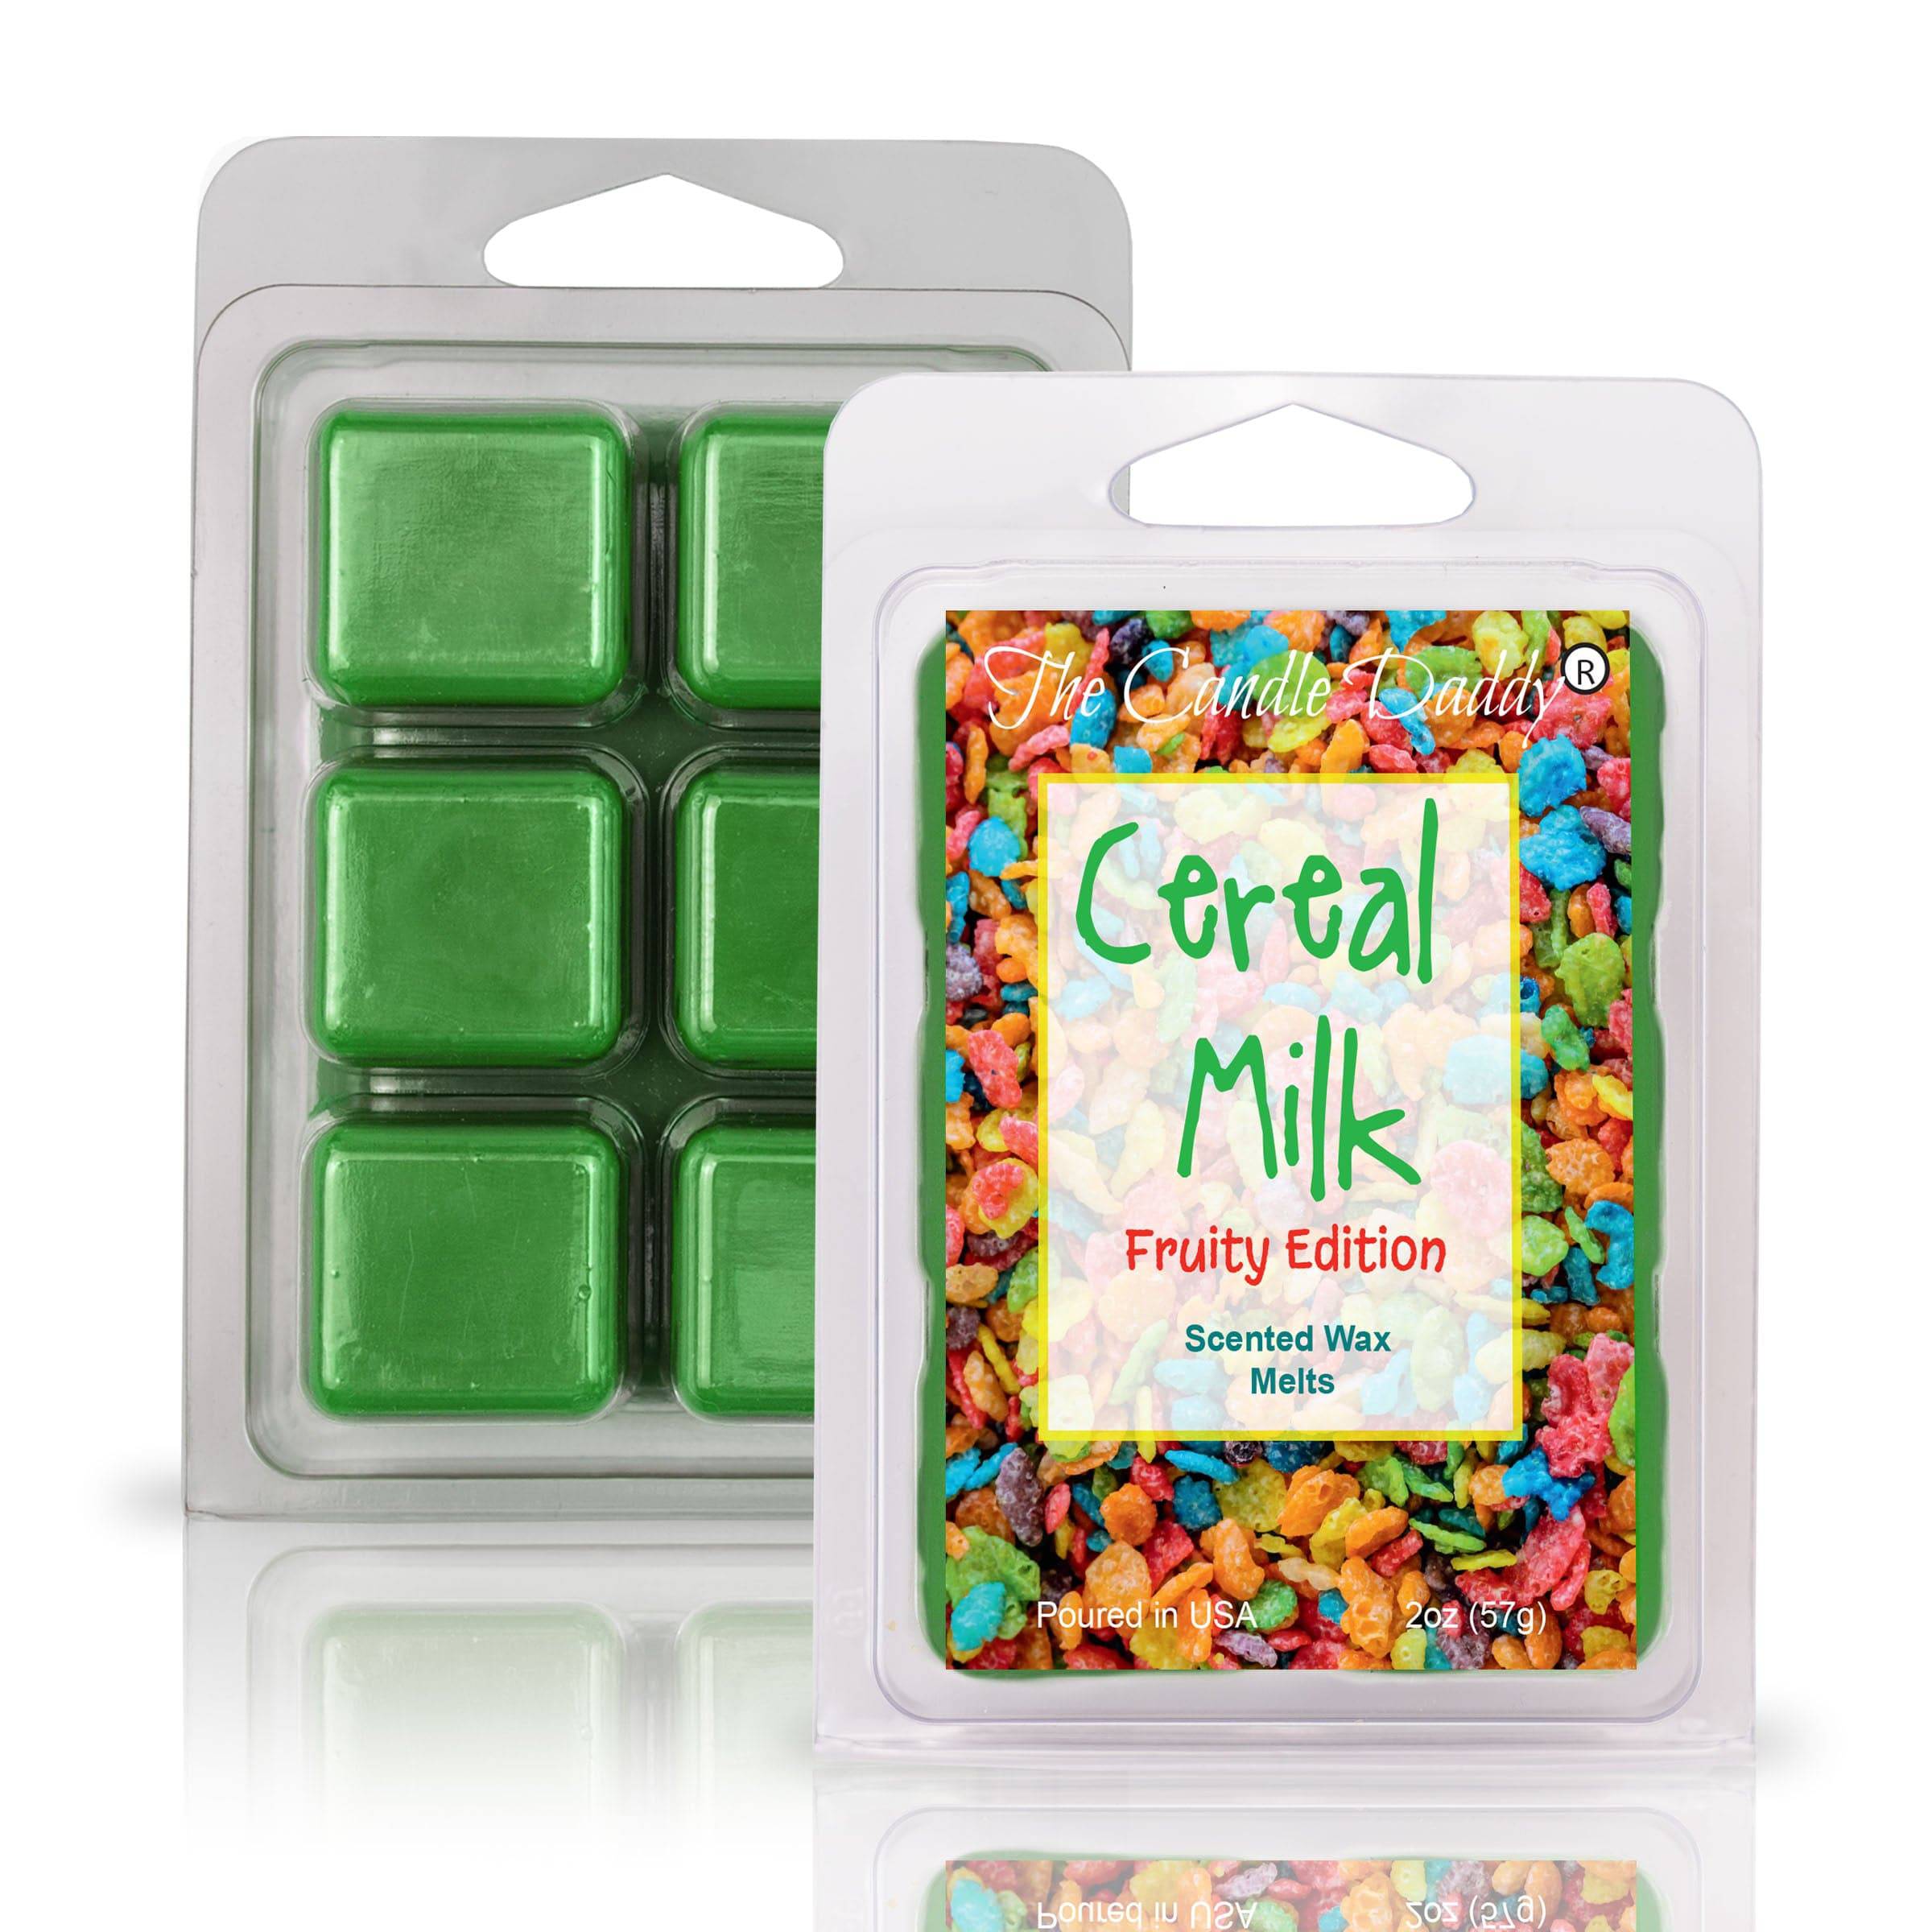 Cereal Milk - Fruity Version Scented Wax Melt - 1 Pack - 2 Ounces